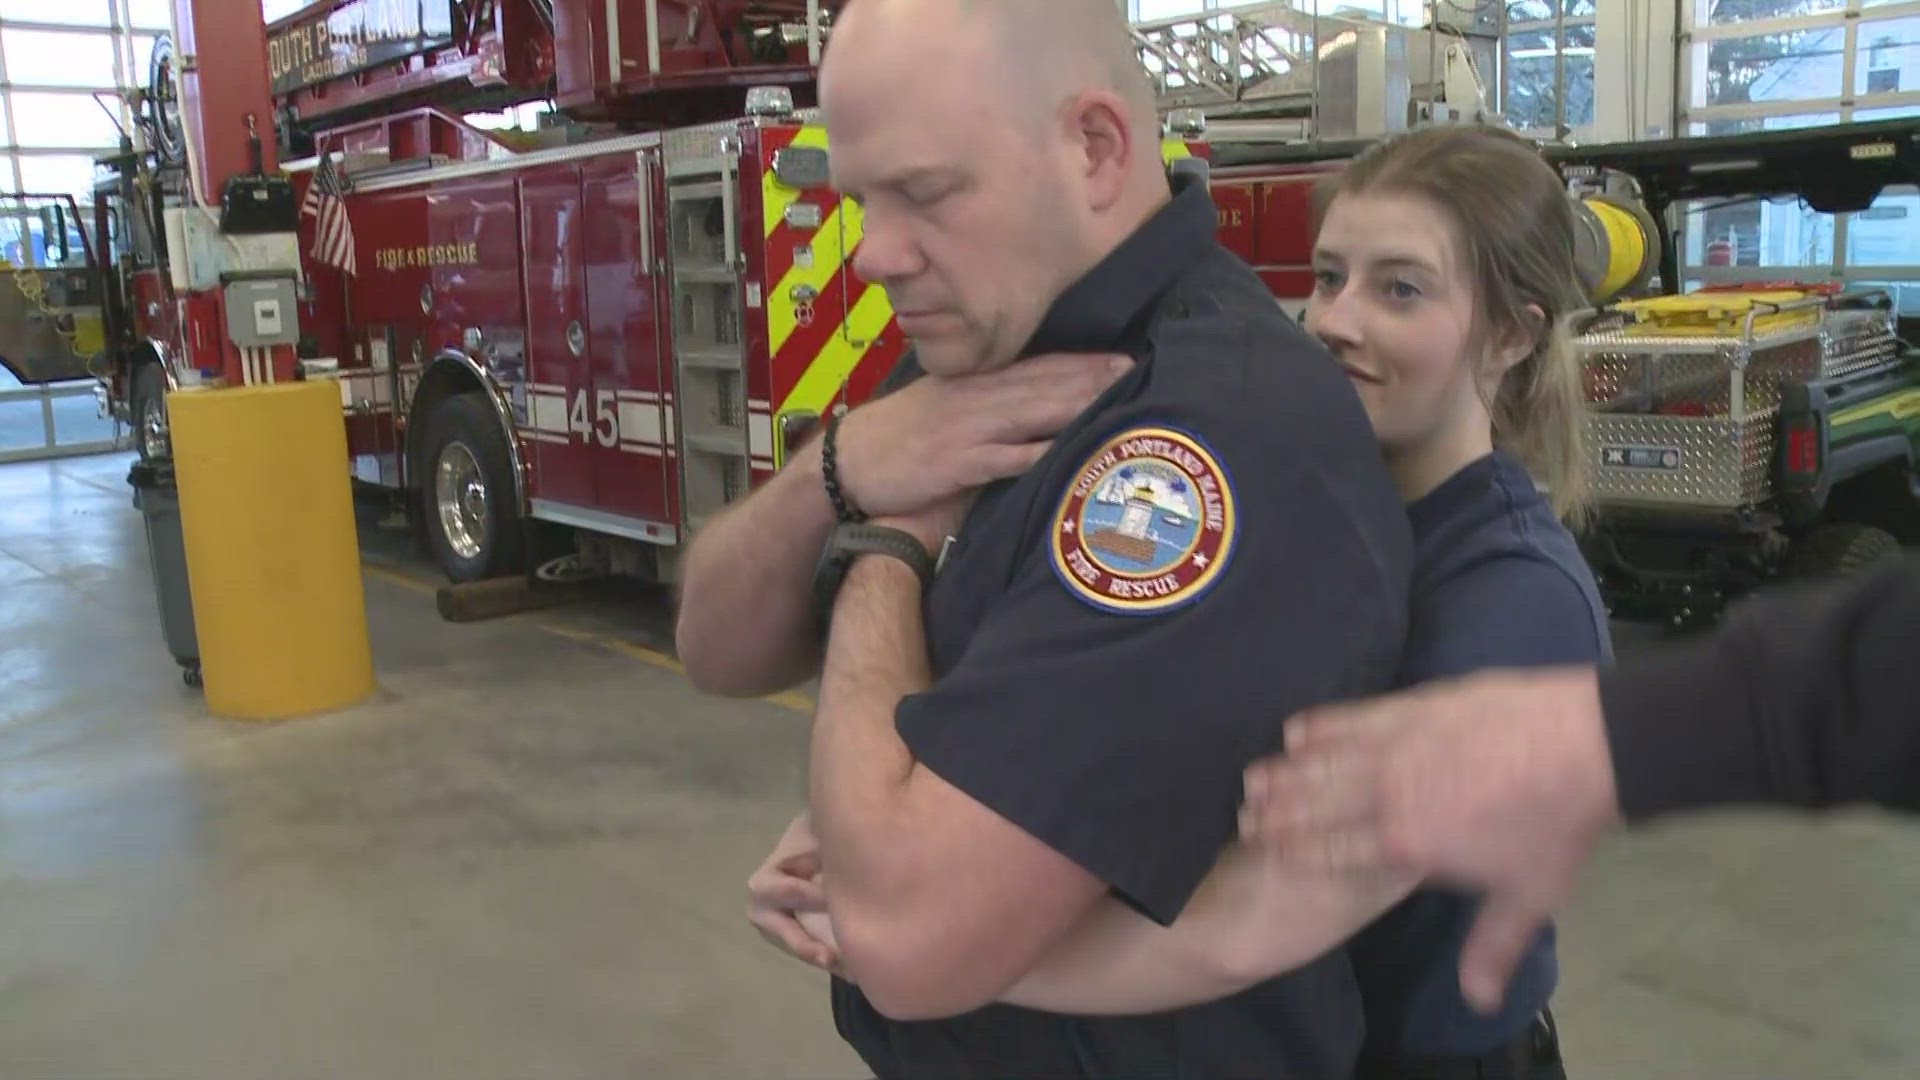 Robb Couture with the South Portland Fire Department said there are two types of choking: a complete and incomplete airway obstruction.